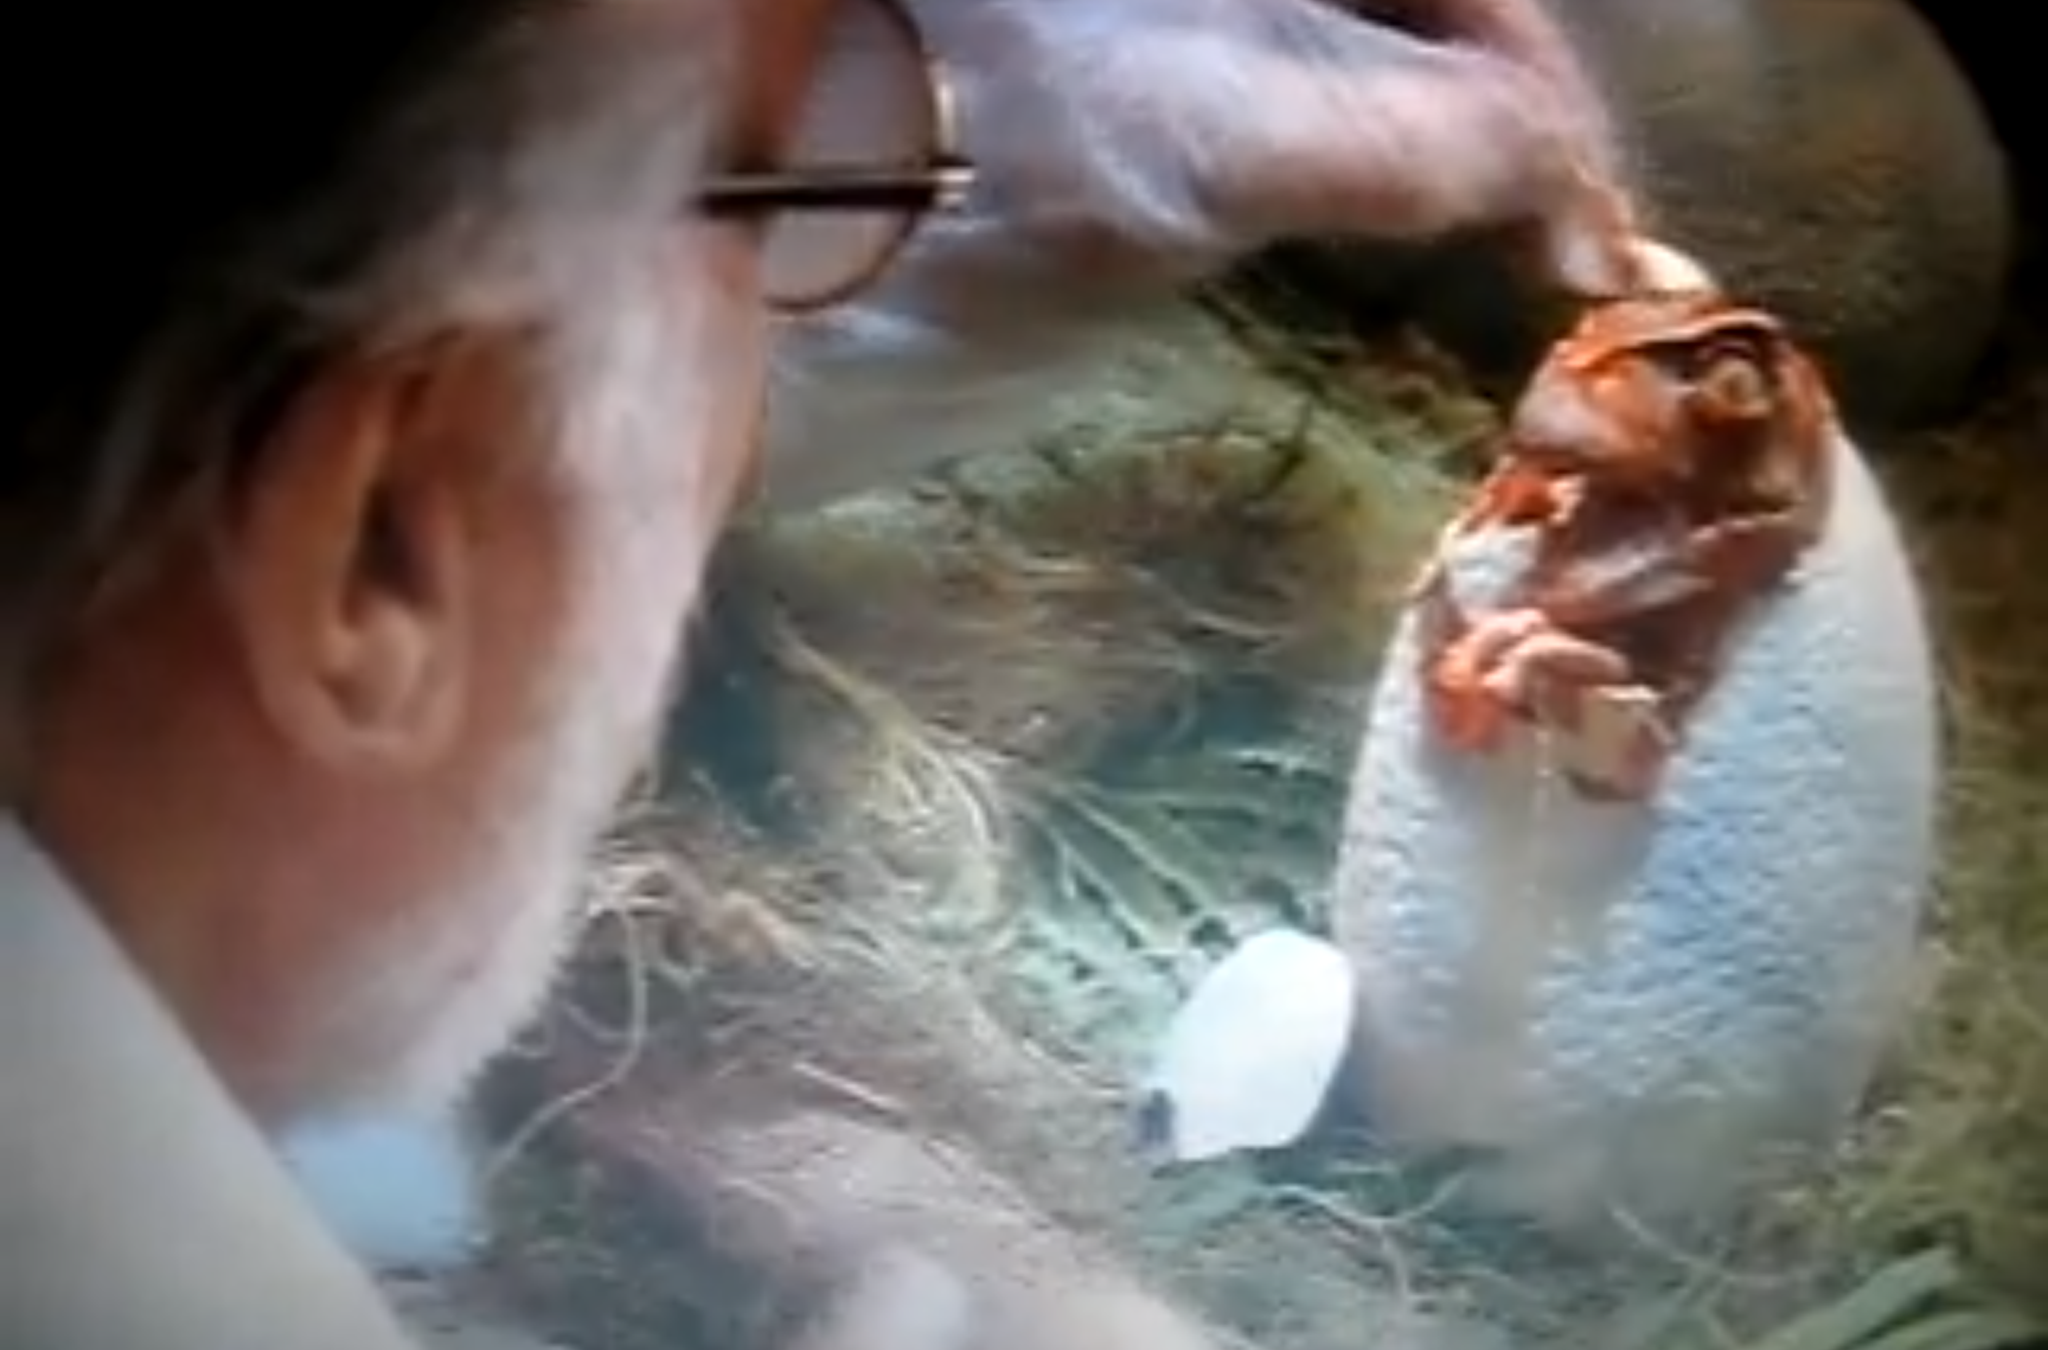 This scene from Steven Spielberg’s Jurassic Park shows the memorable moment when the first genetically engineered dinosaur hatches.